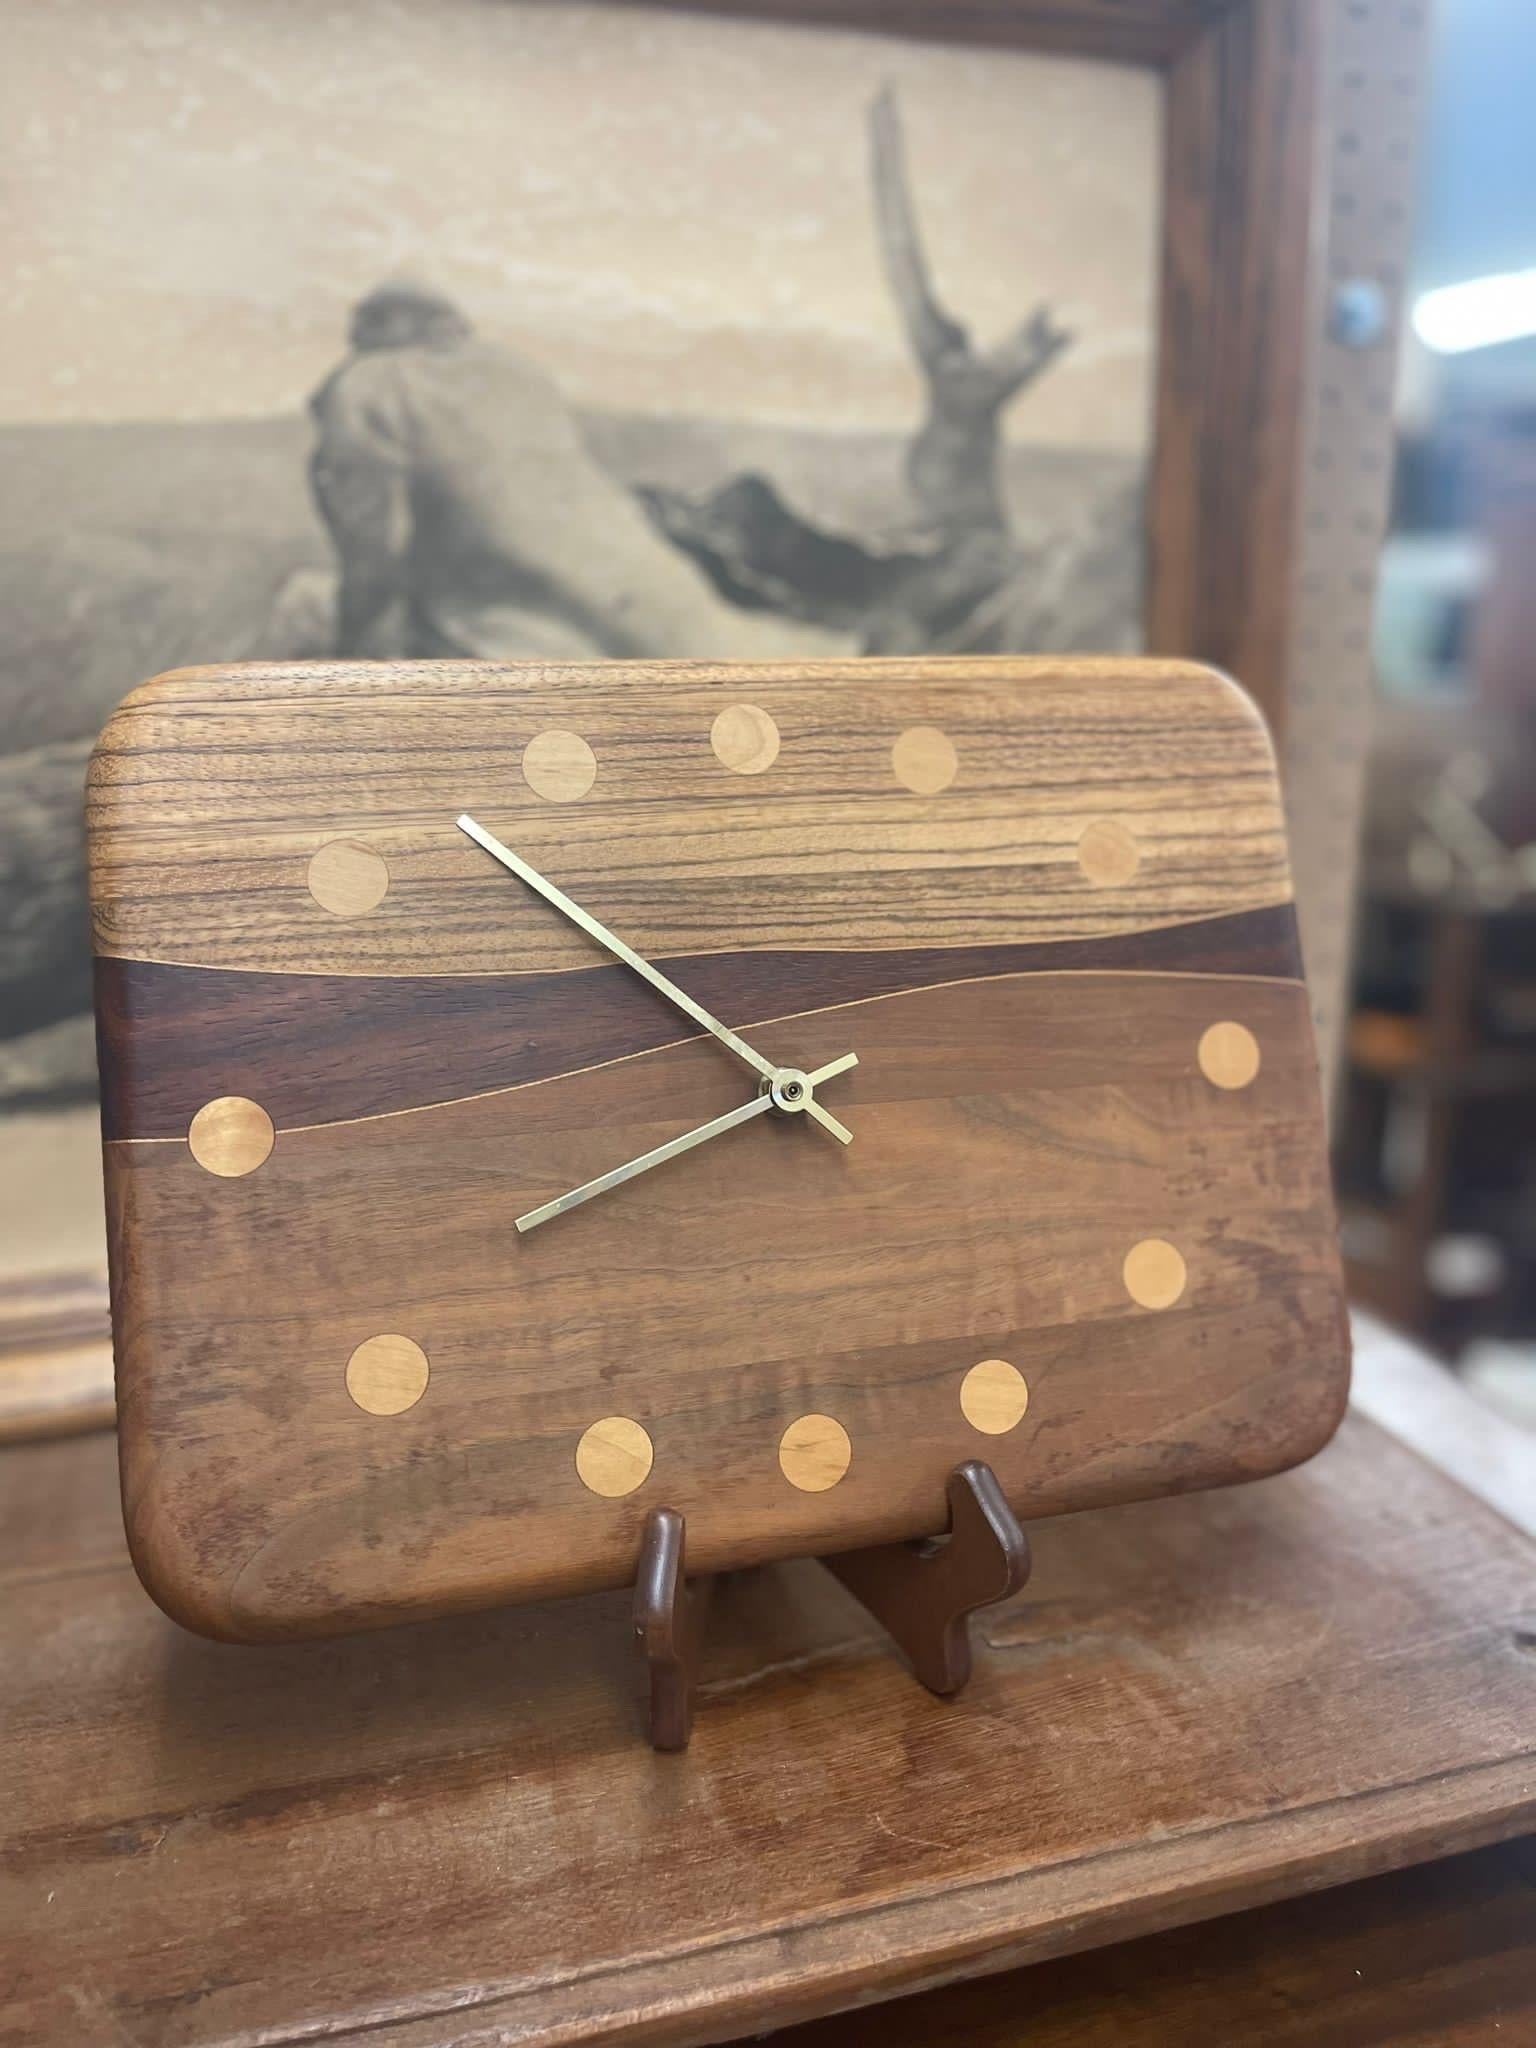 Mid Century Modern Wooden Clock with Four Deferent Types Of Wood Grain. Operational Ability Unknown. Vintage Condition Consistent with Age as Pictured.

Dimensions. 13 W ; 1 D ; 7 H